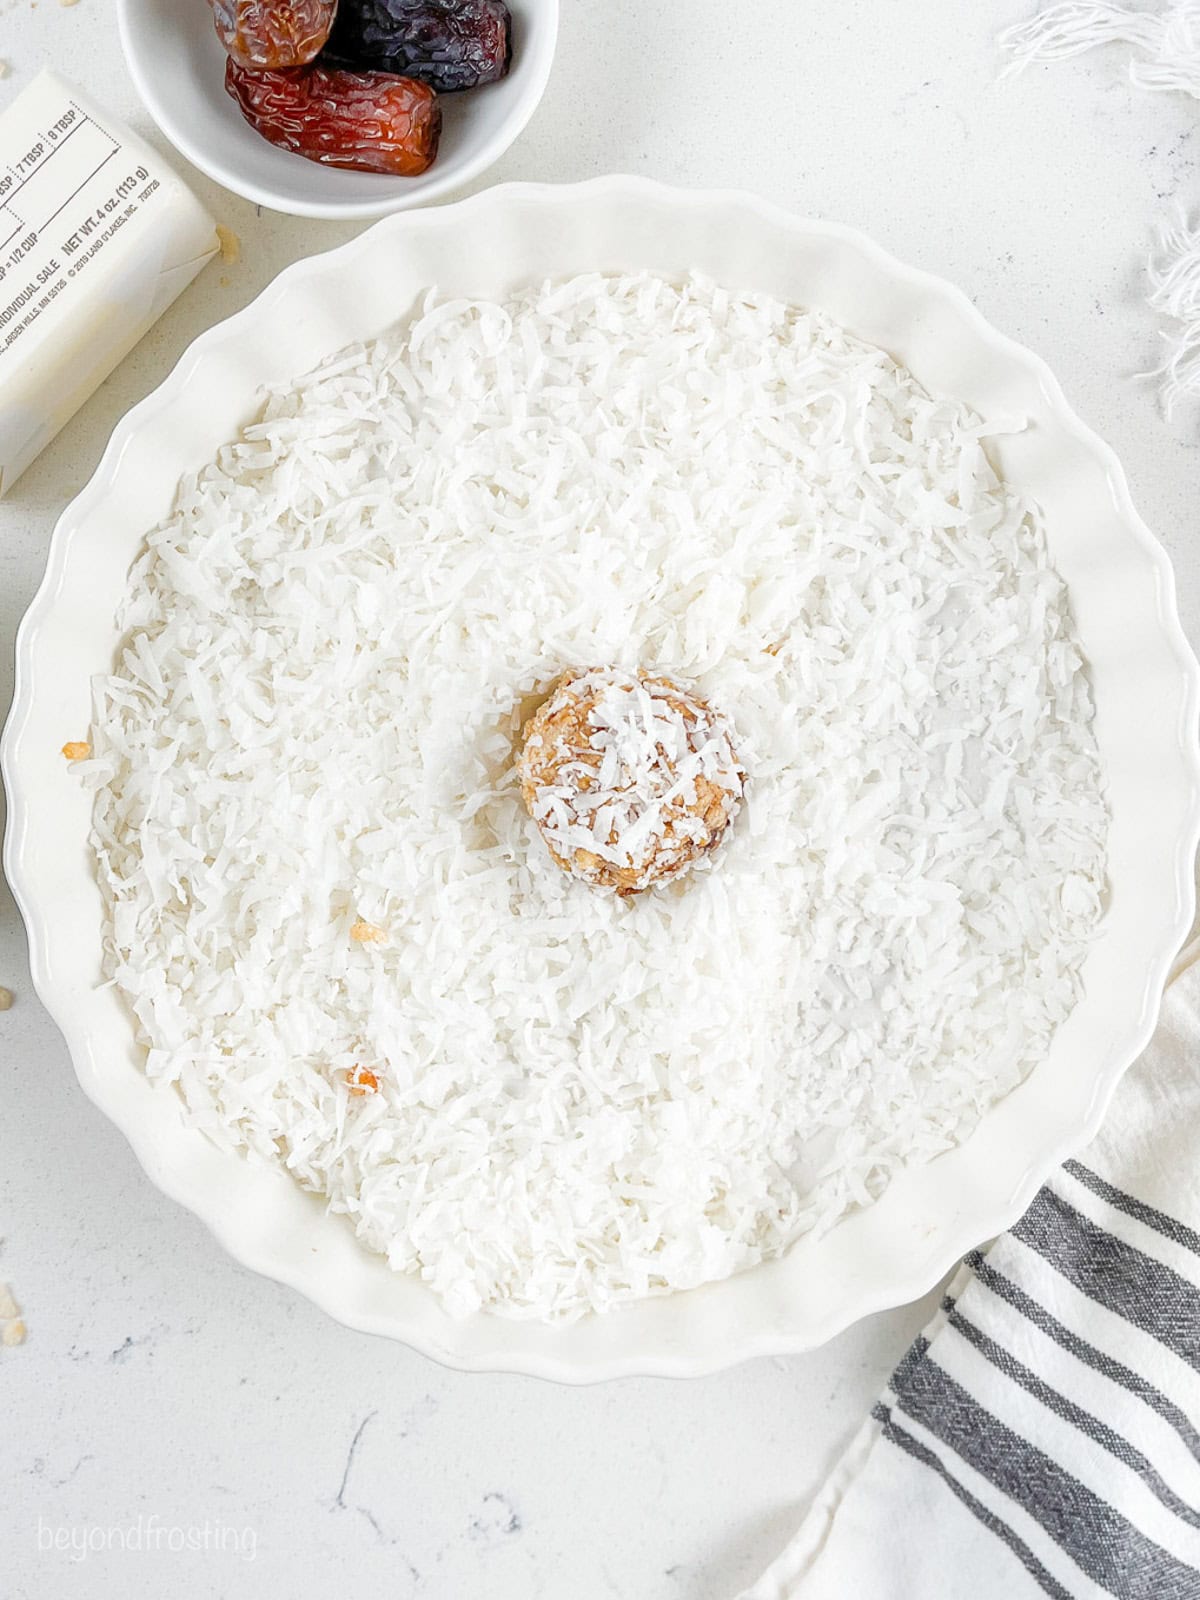 A date ball resting in a bowl of shredded coconut.